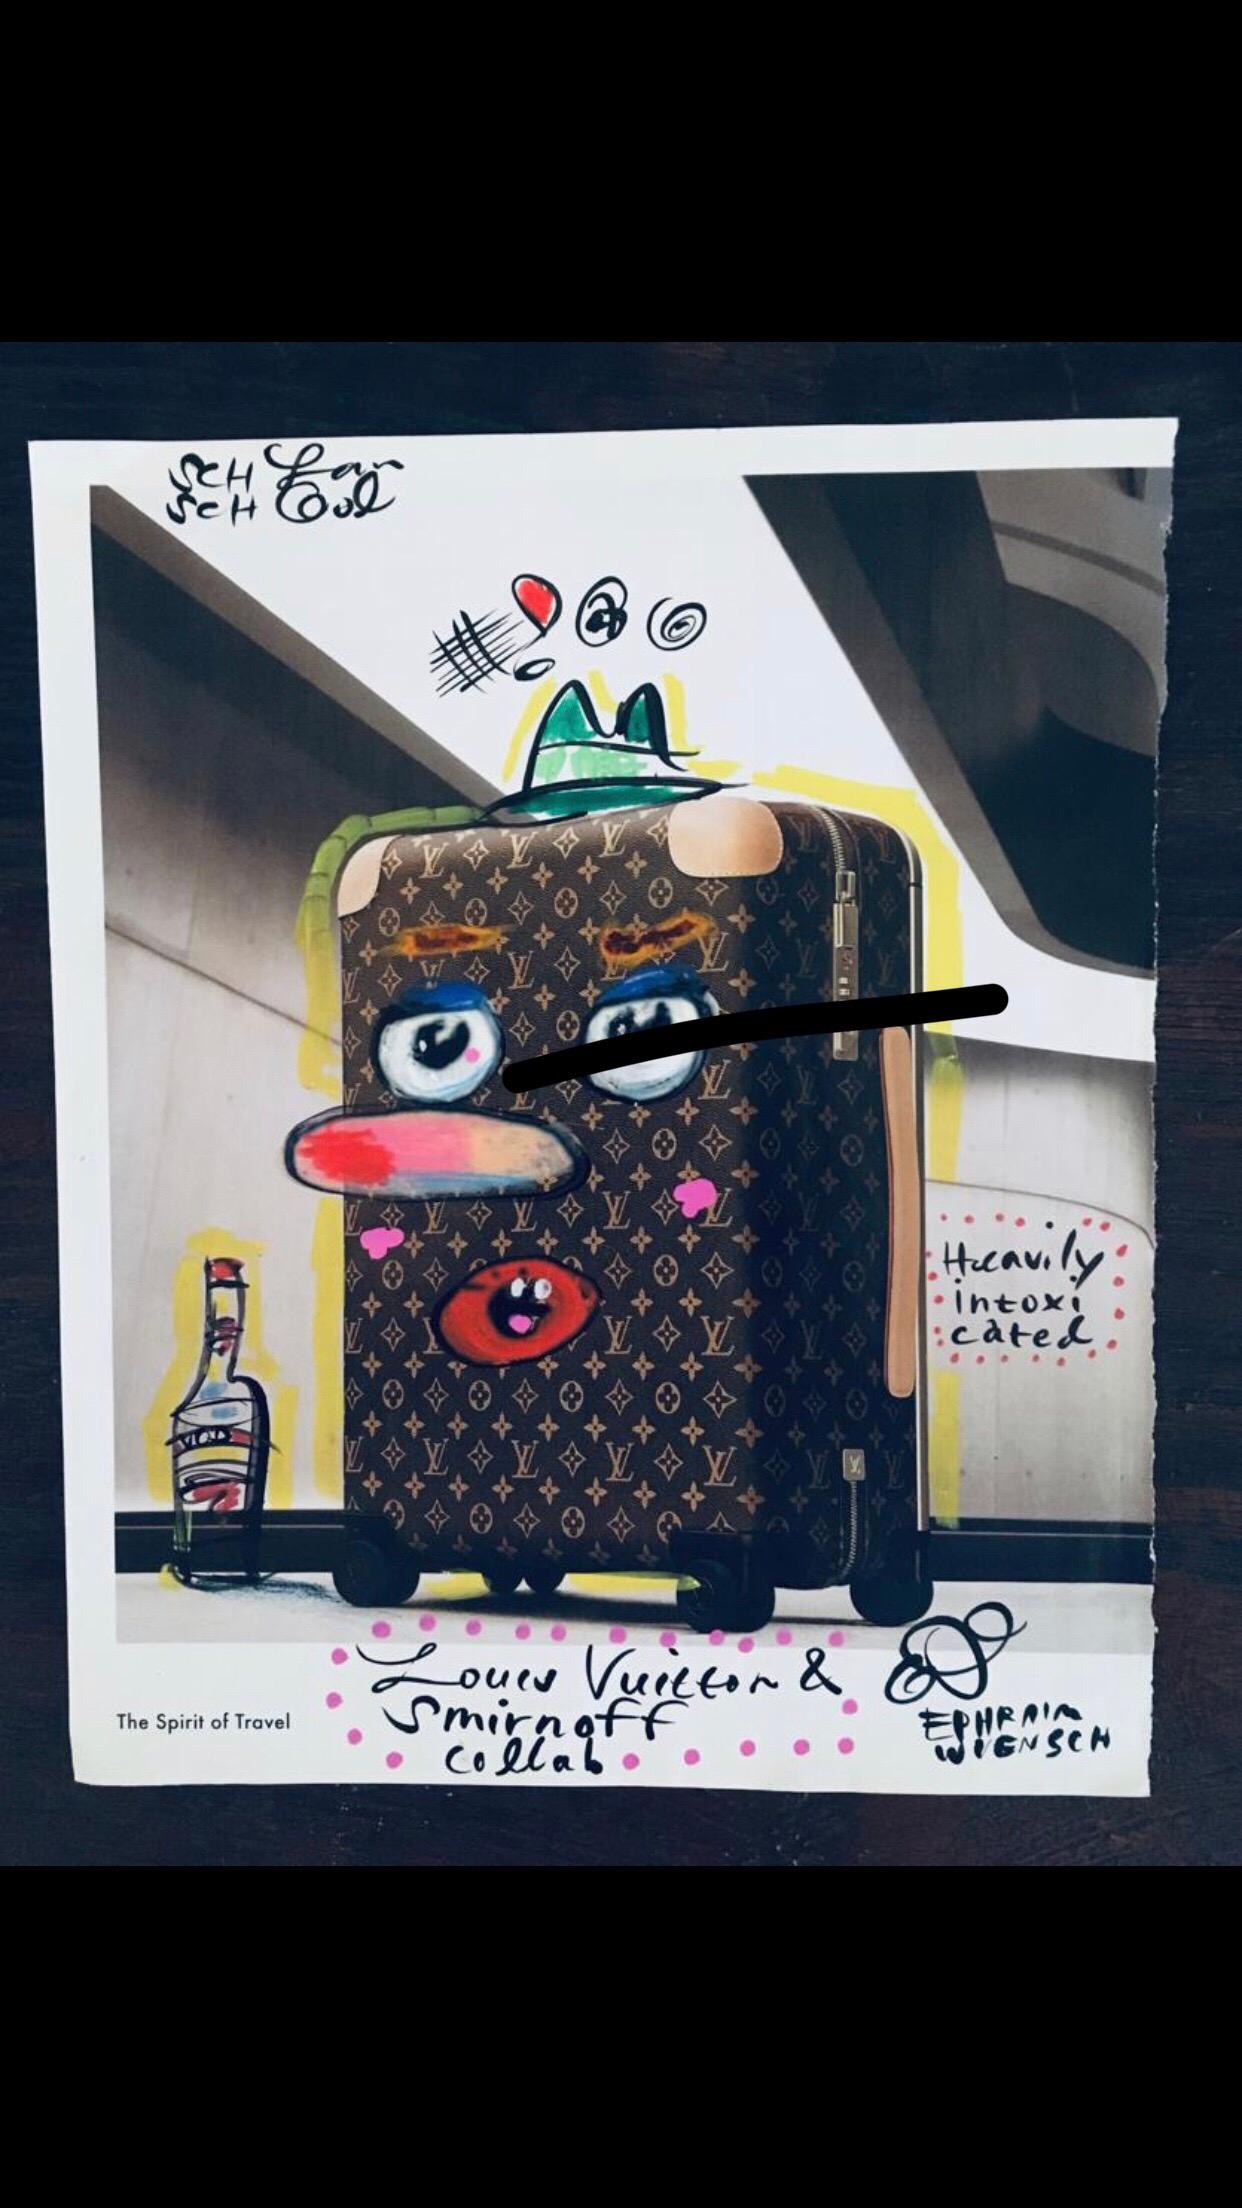 The bold and eclectic work of self taught artist Ephraim Wuensch is part social commentary part contemporary street art. These are mixed media reworked luxury magazine advertisements providing a humorous commentary on our contemporary consumerist